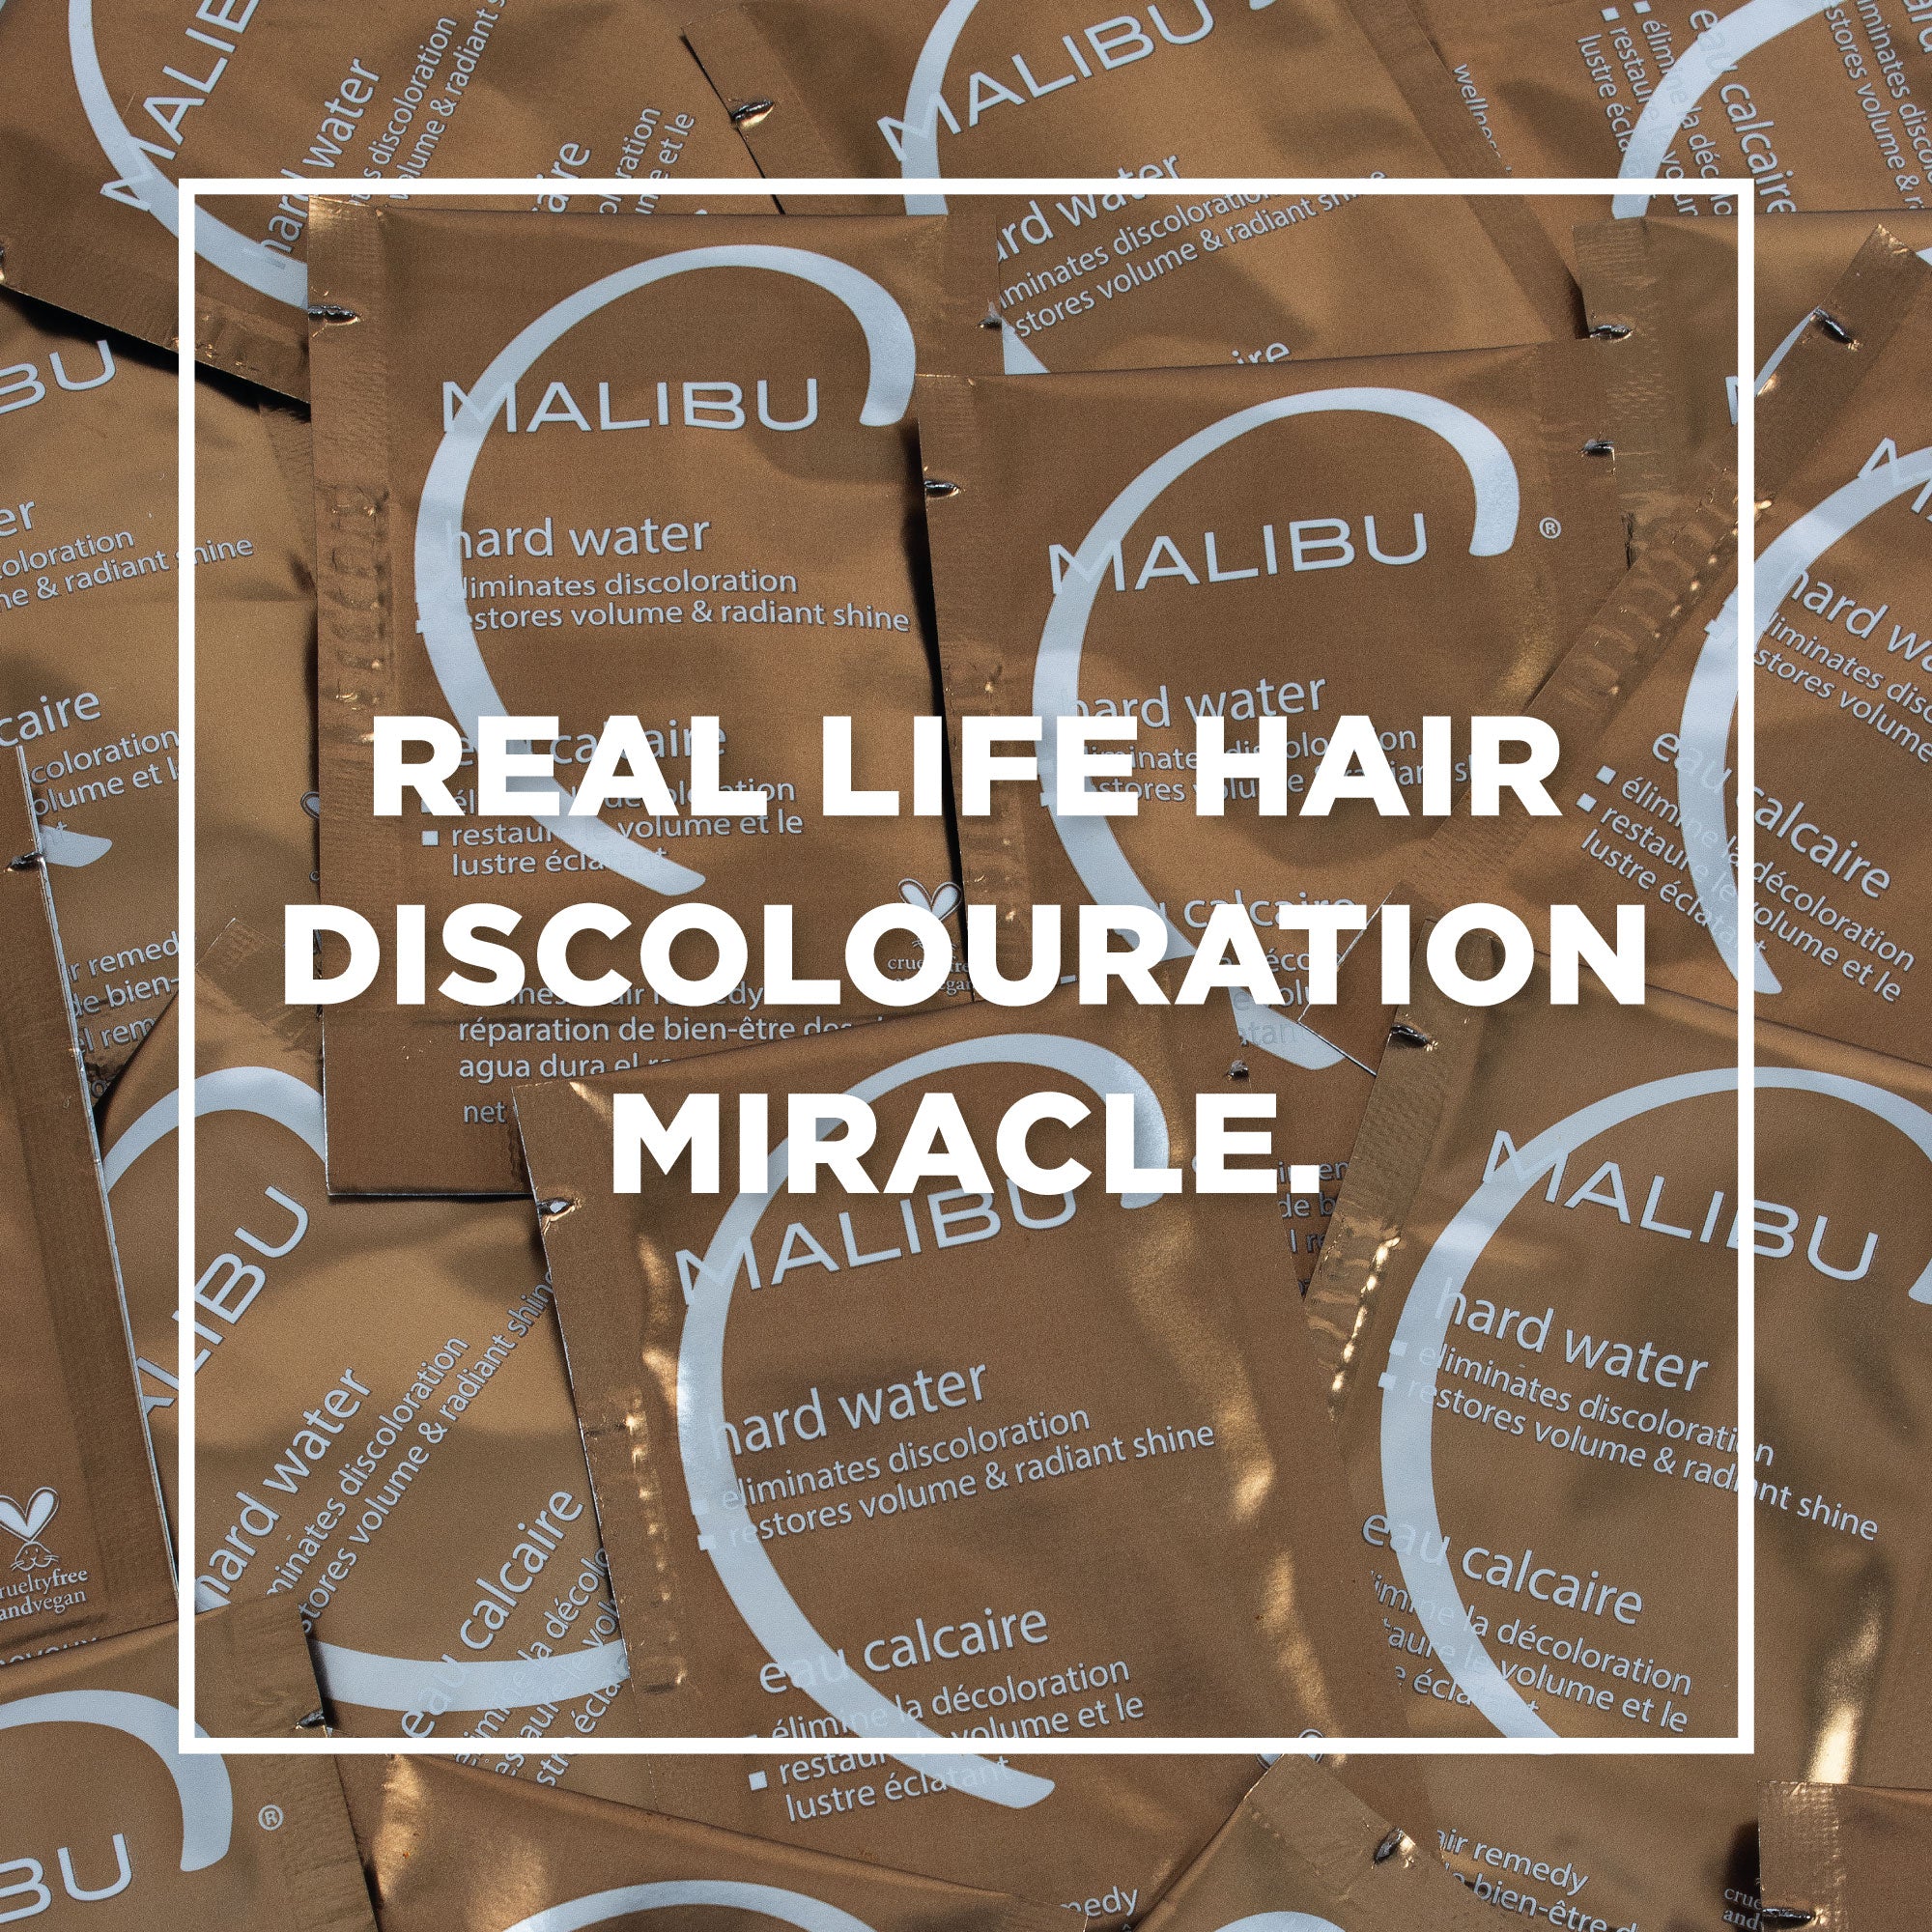 A real-life hair discolouration miracle cure